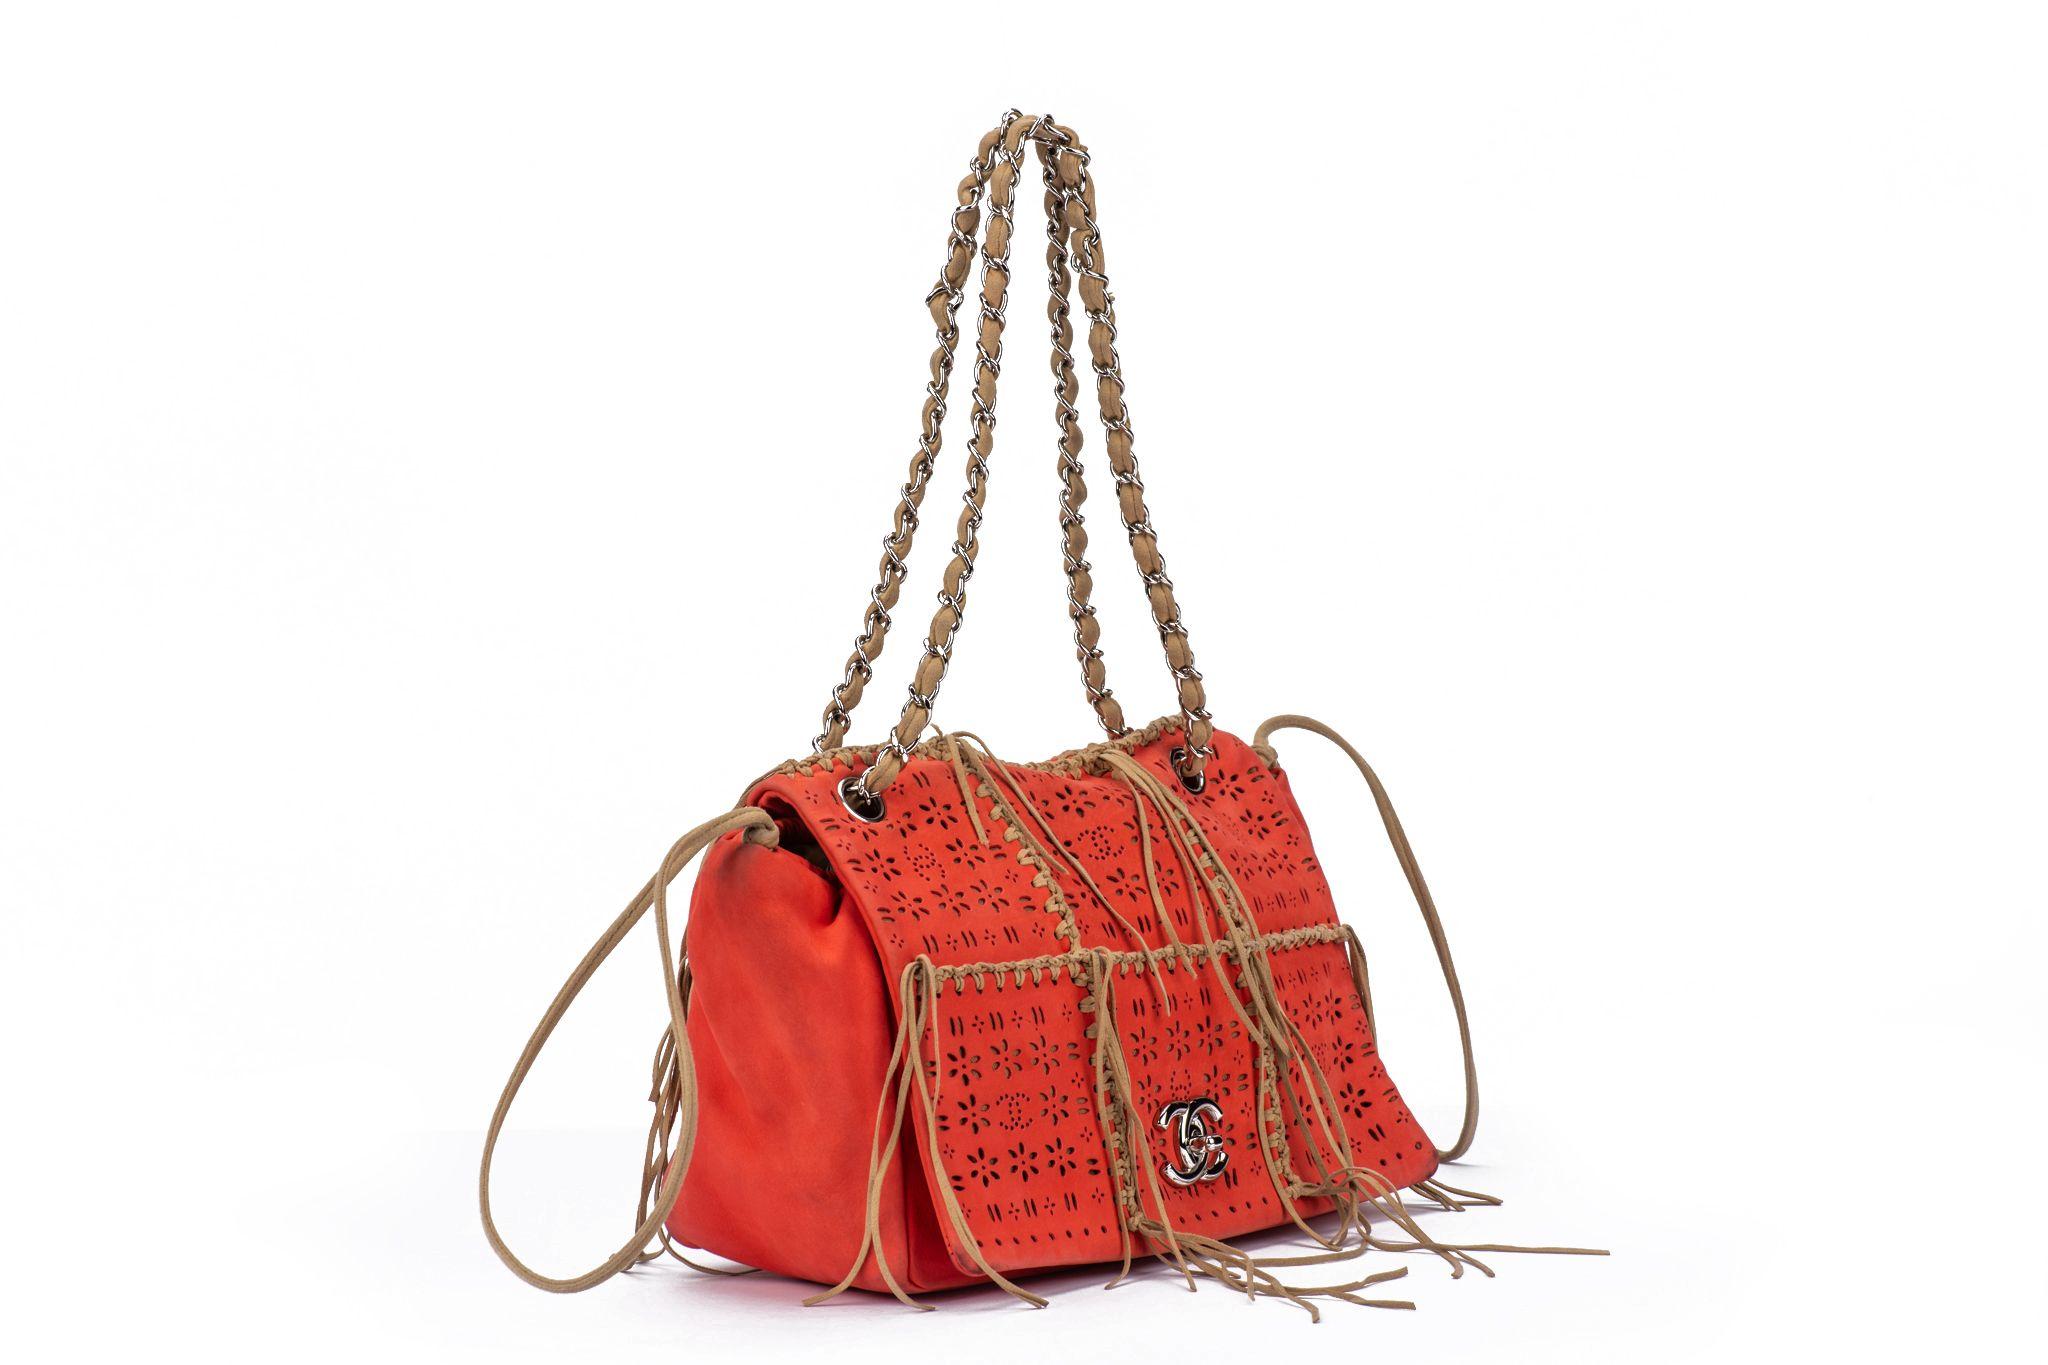 Chanel Vintage CC Turnlock Flap Tote featuring Perforated Leather in orange. The bag has several tangles on both ends of it. The interior is made of canvas in a light brown. Collection #14, 2010/2011. Handle drop 8.5”. The item is in excellent